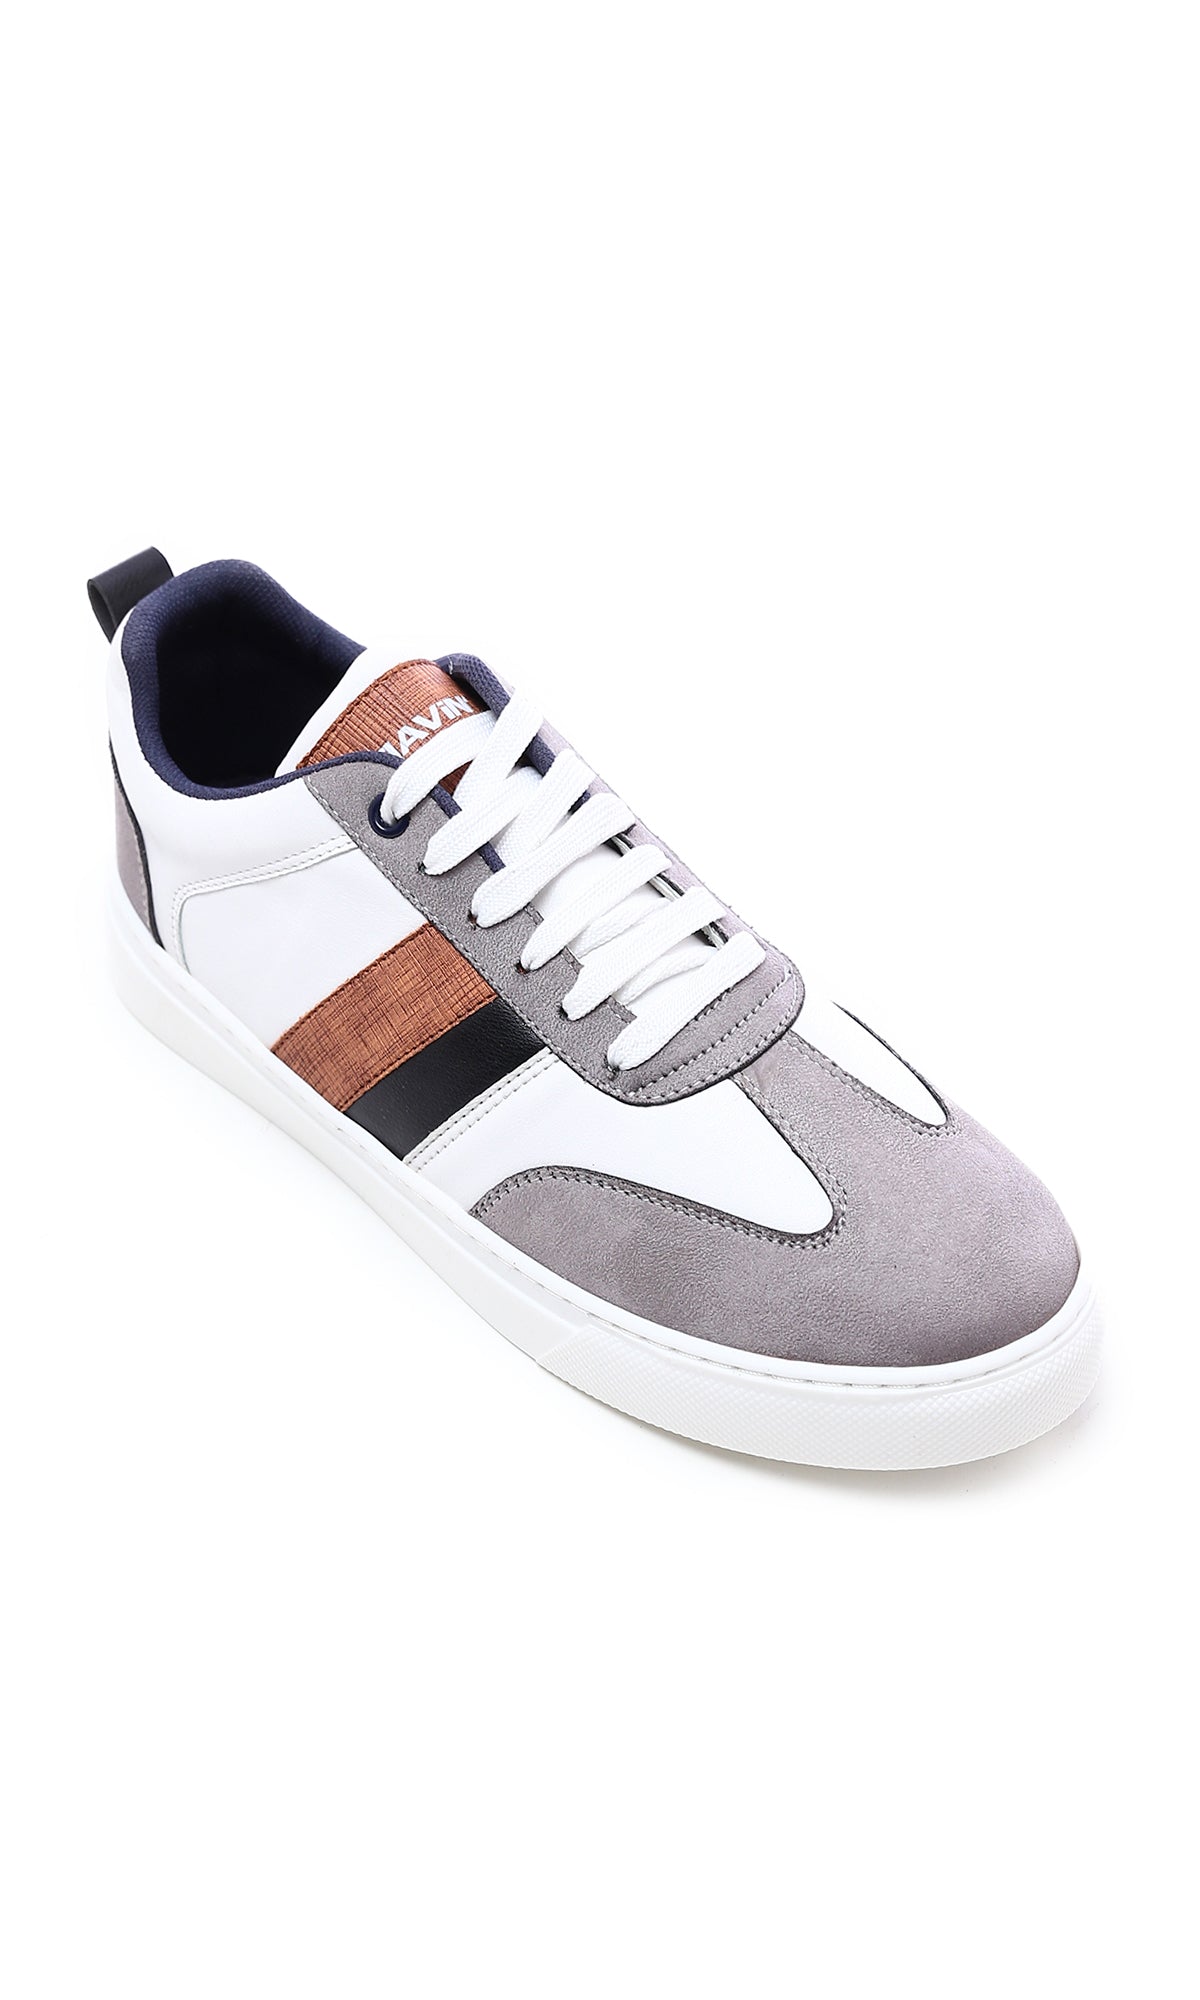 O176723 Round Toecap Lace Up Casual Shoes - Grey & White